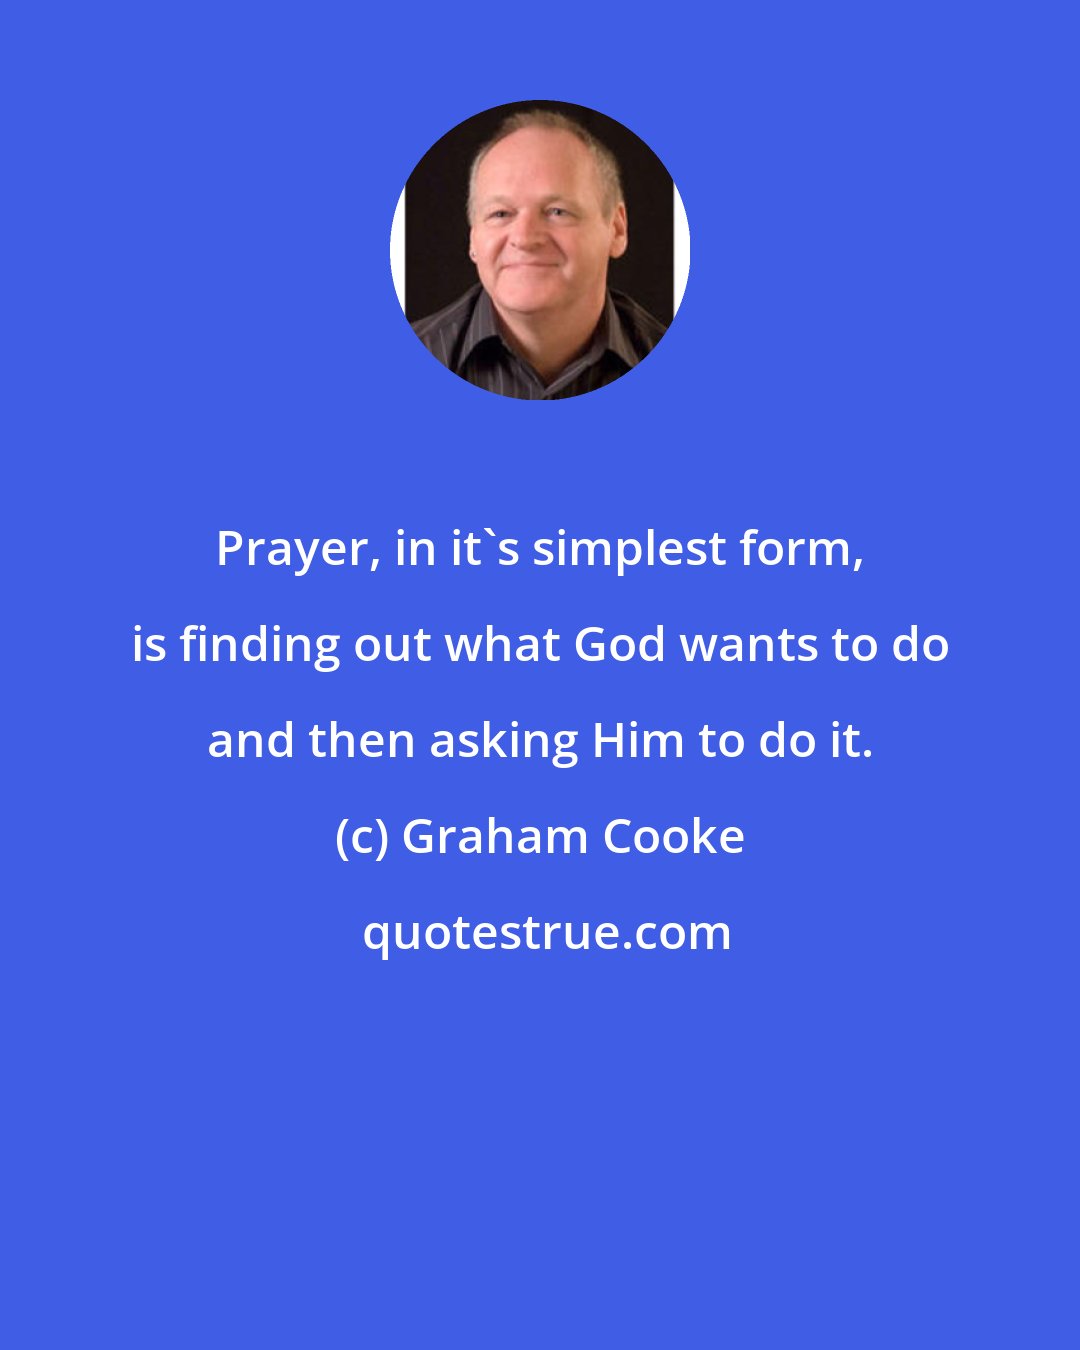 Graham Cooke: Prayer, in it's simplest form, is finding out what God wants to do and then asking Him to do it.